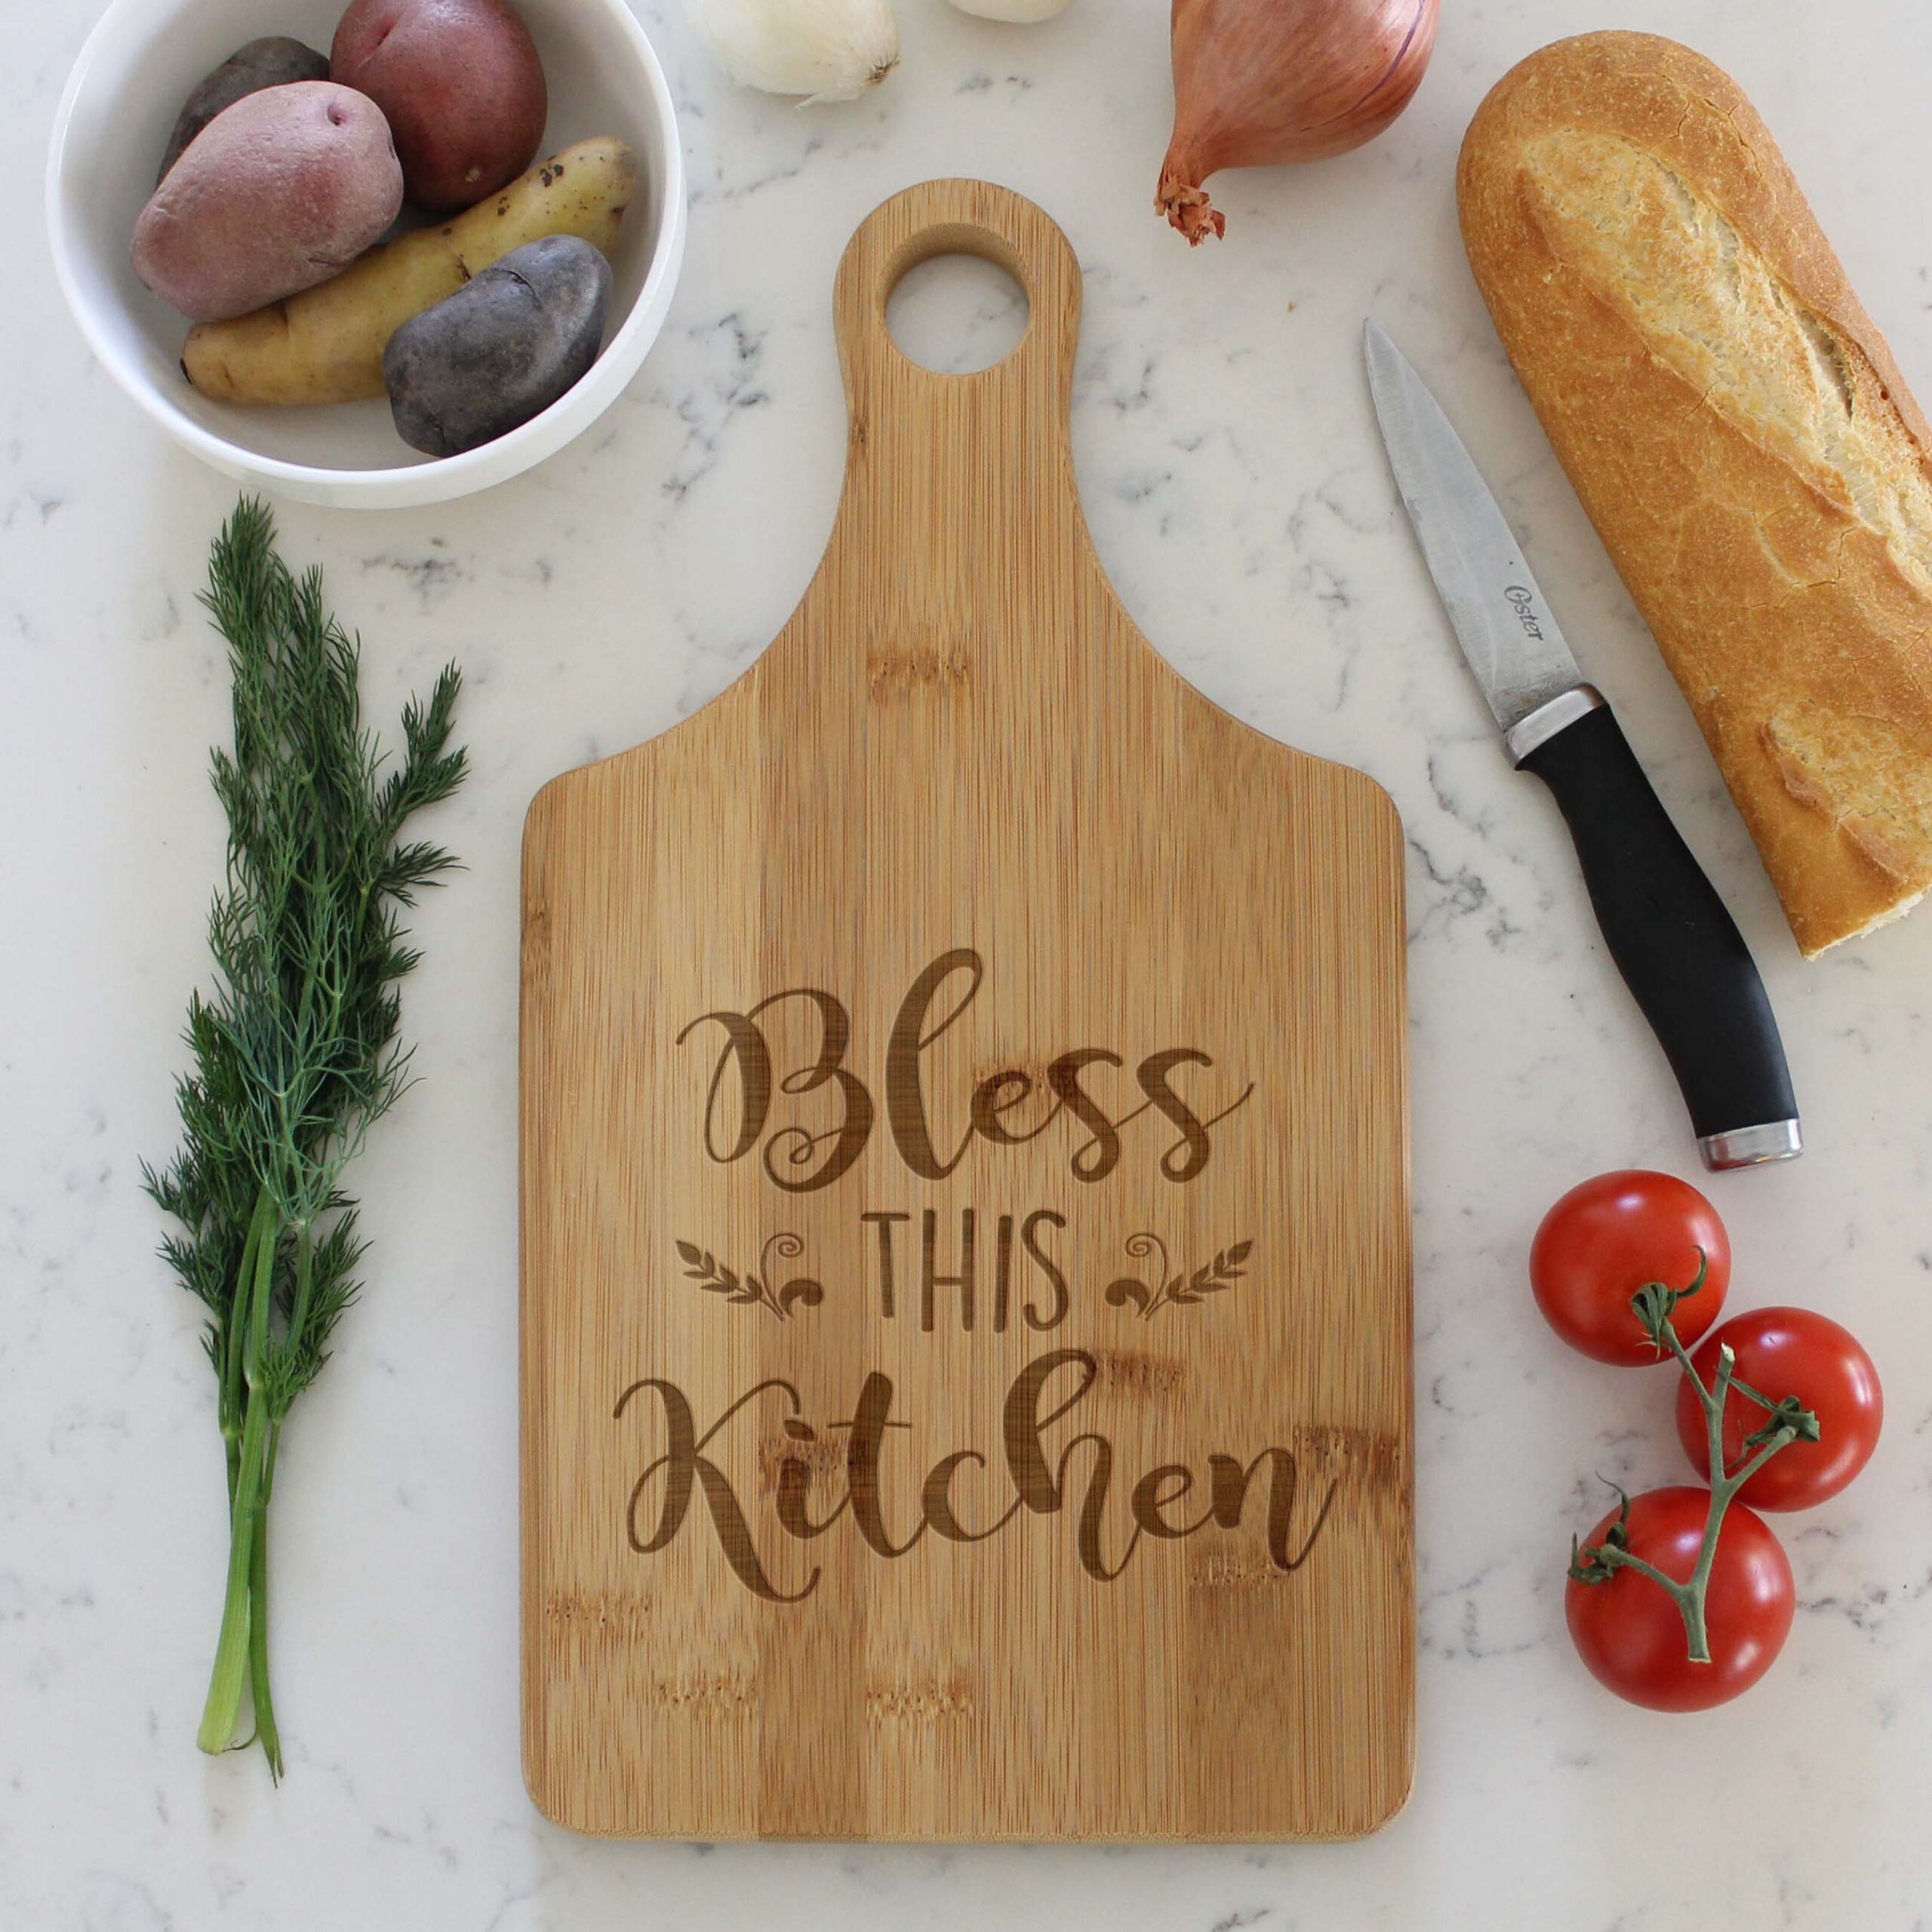 Personalized Cutting Board, Engraved Cutting Boards, Kitchen Decor